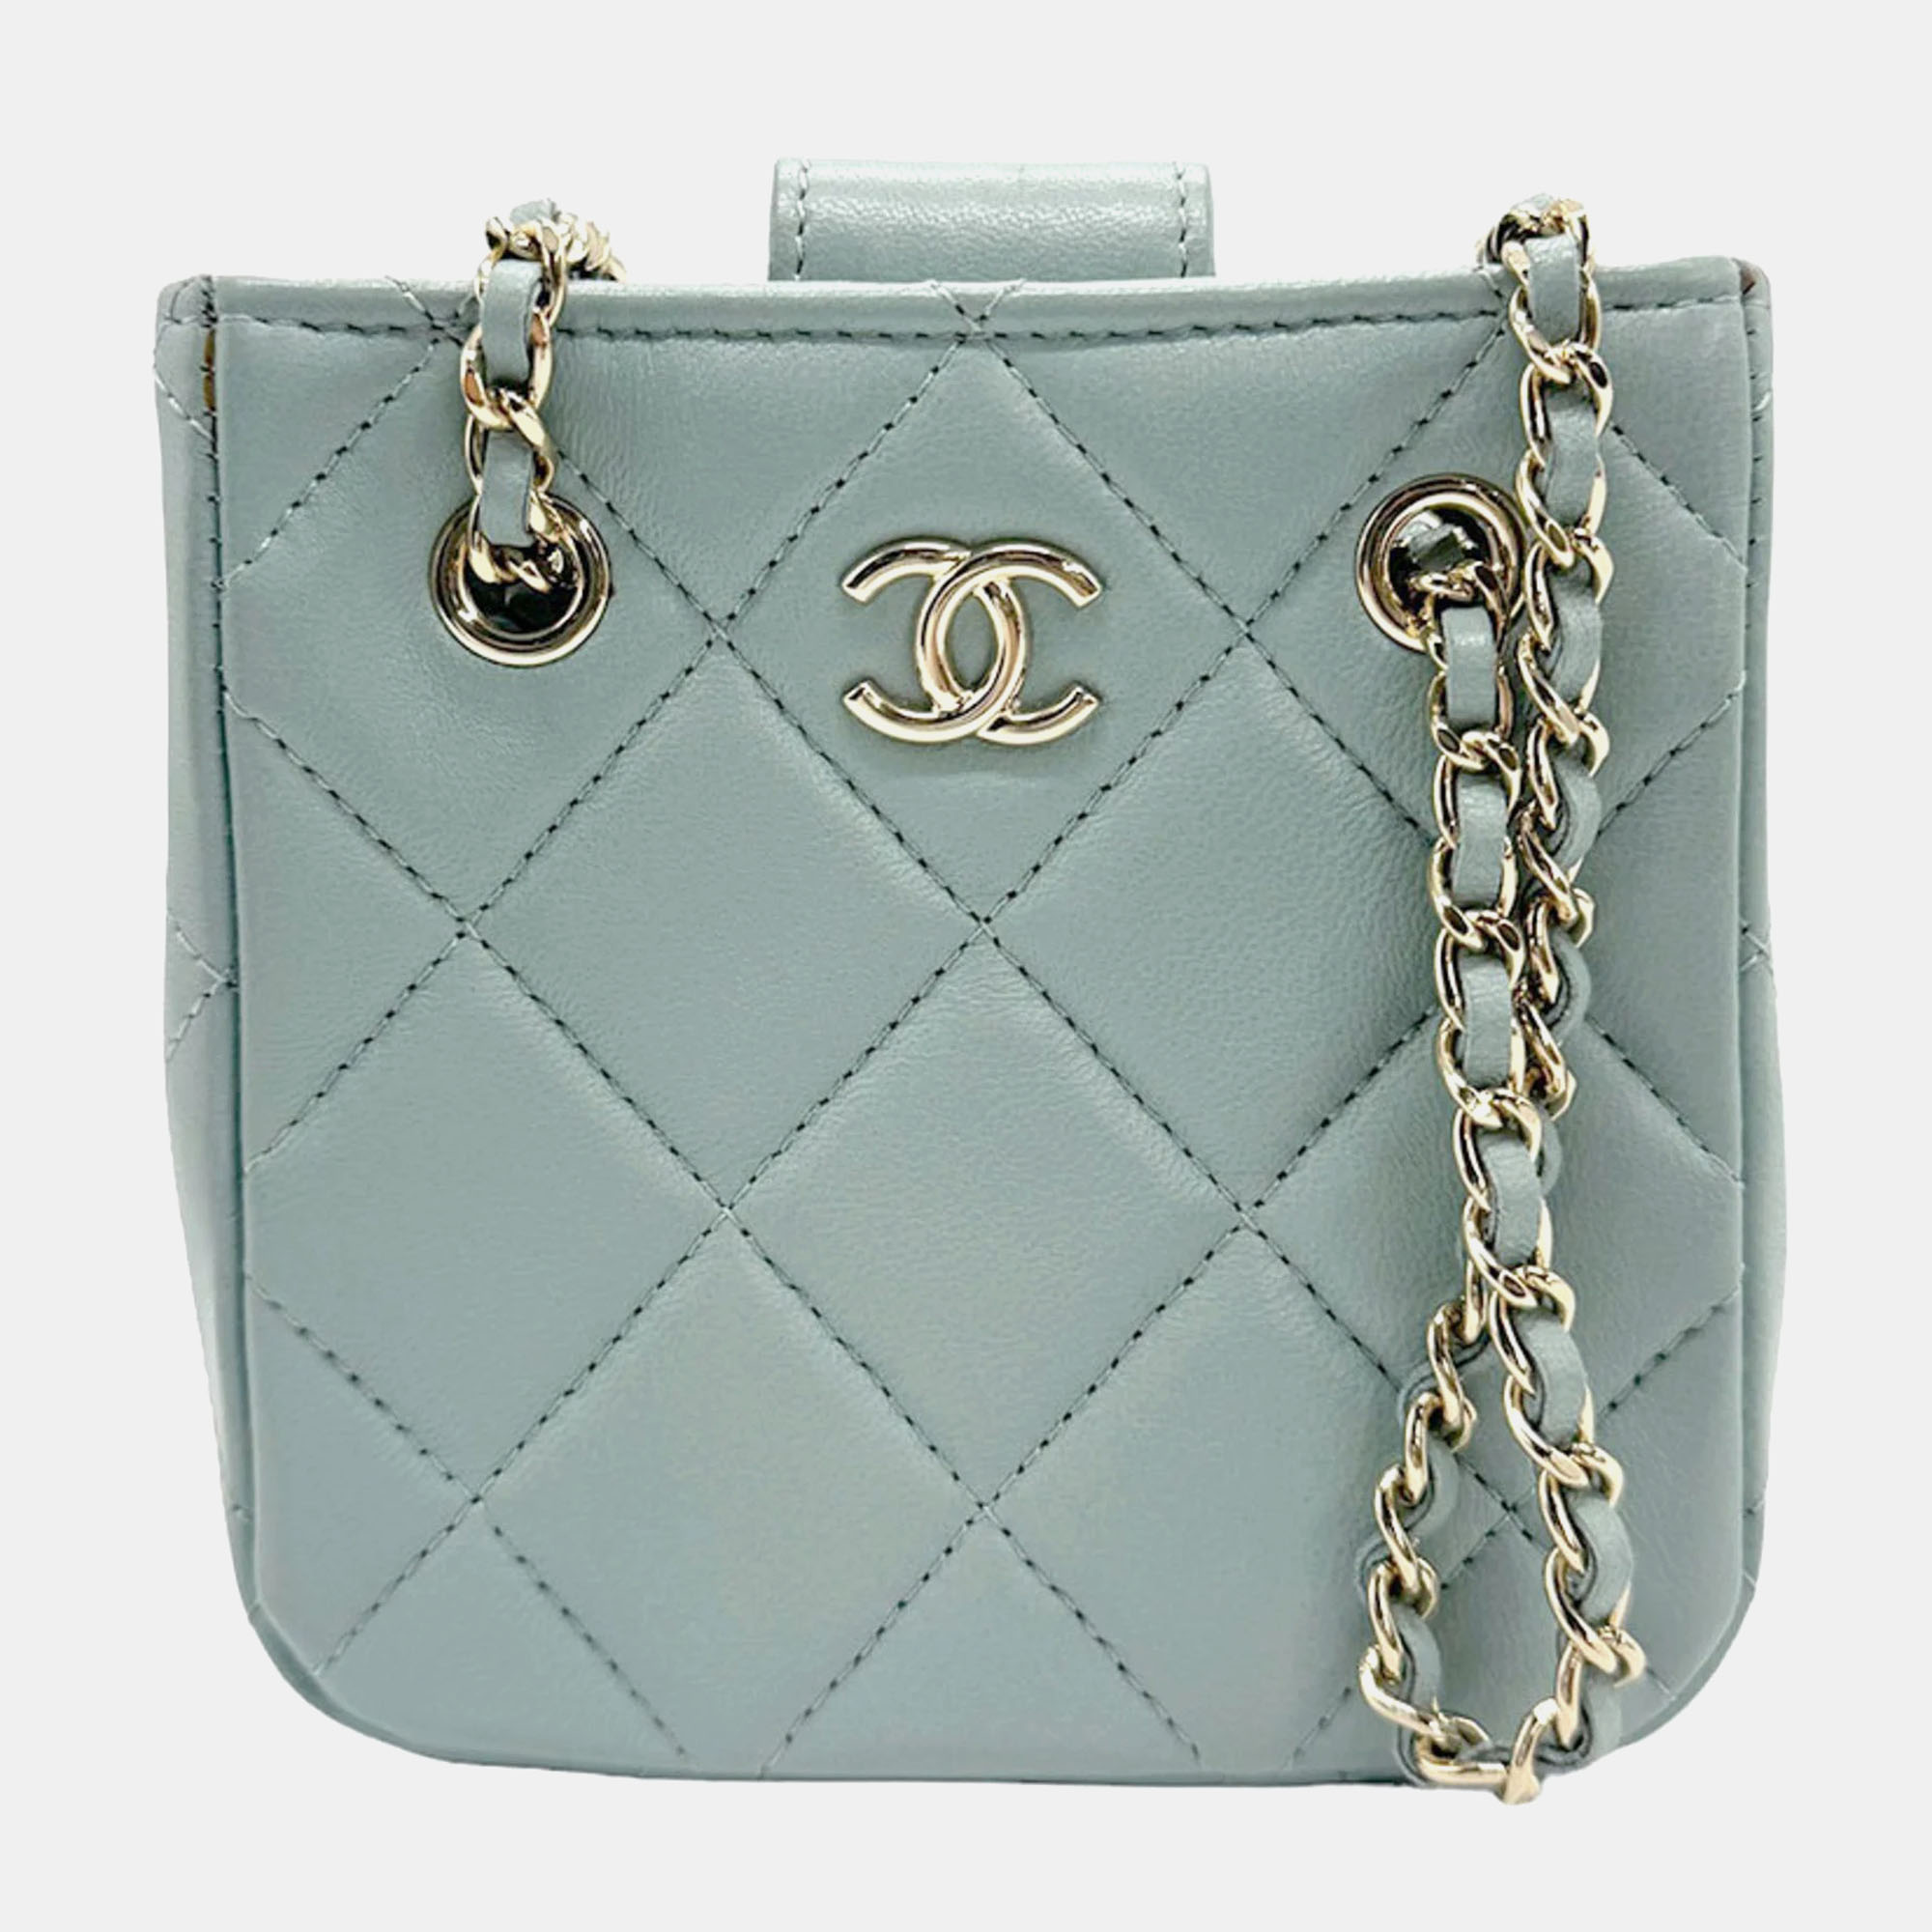 Chanel light blue lambskin quilted tiny shopping clutch with chain